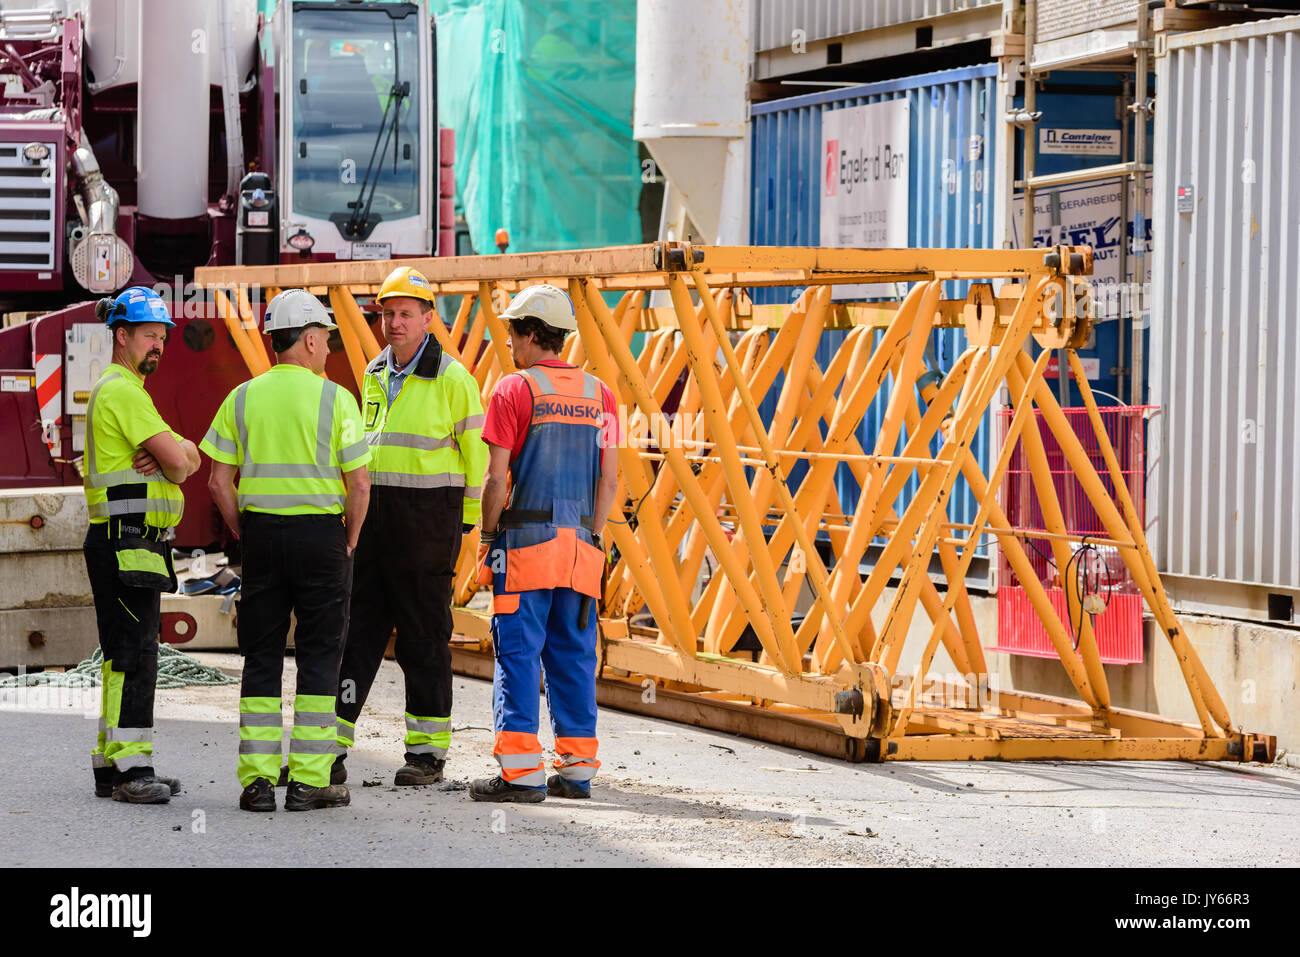 Kristiansand, Norway - August 1, 2017: Documentary of everyday life in the city. Group of construction workers having discussion. Crane parts on groun Stock Photo